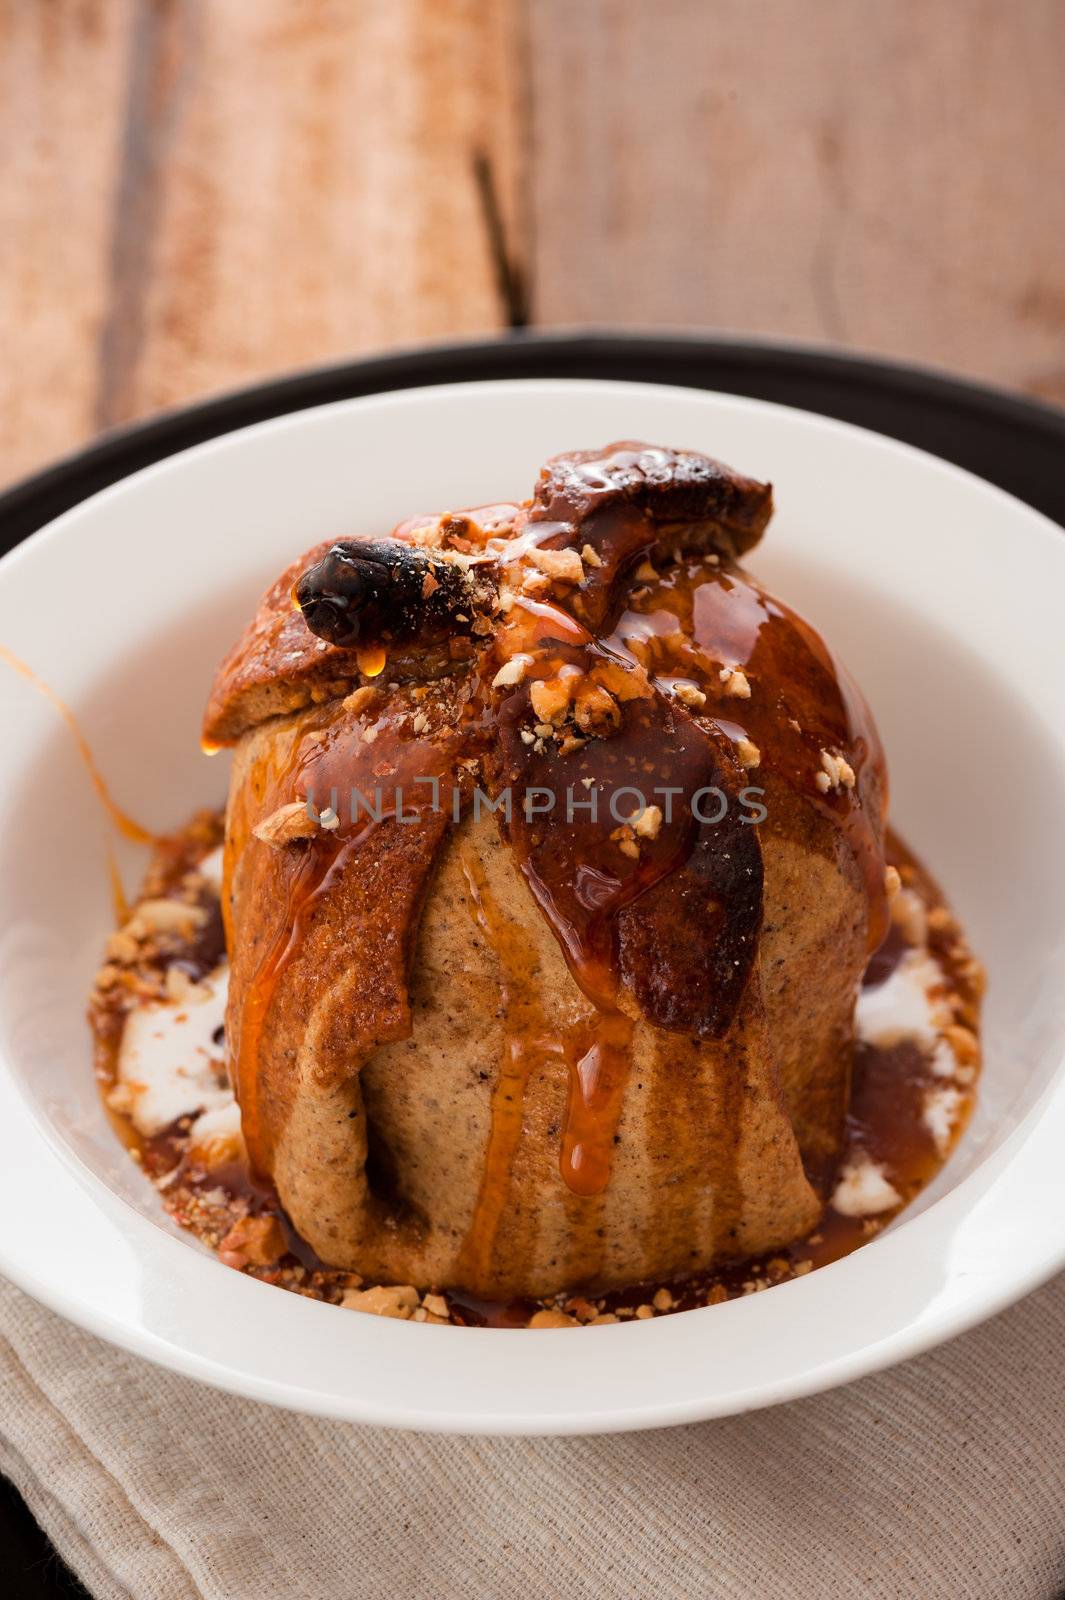 baked apple with a coat of cinnamon dough and an orange Grand Marnier sauce on wooden table as background